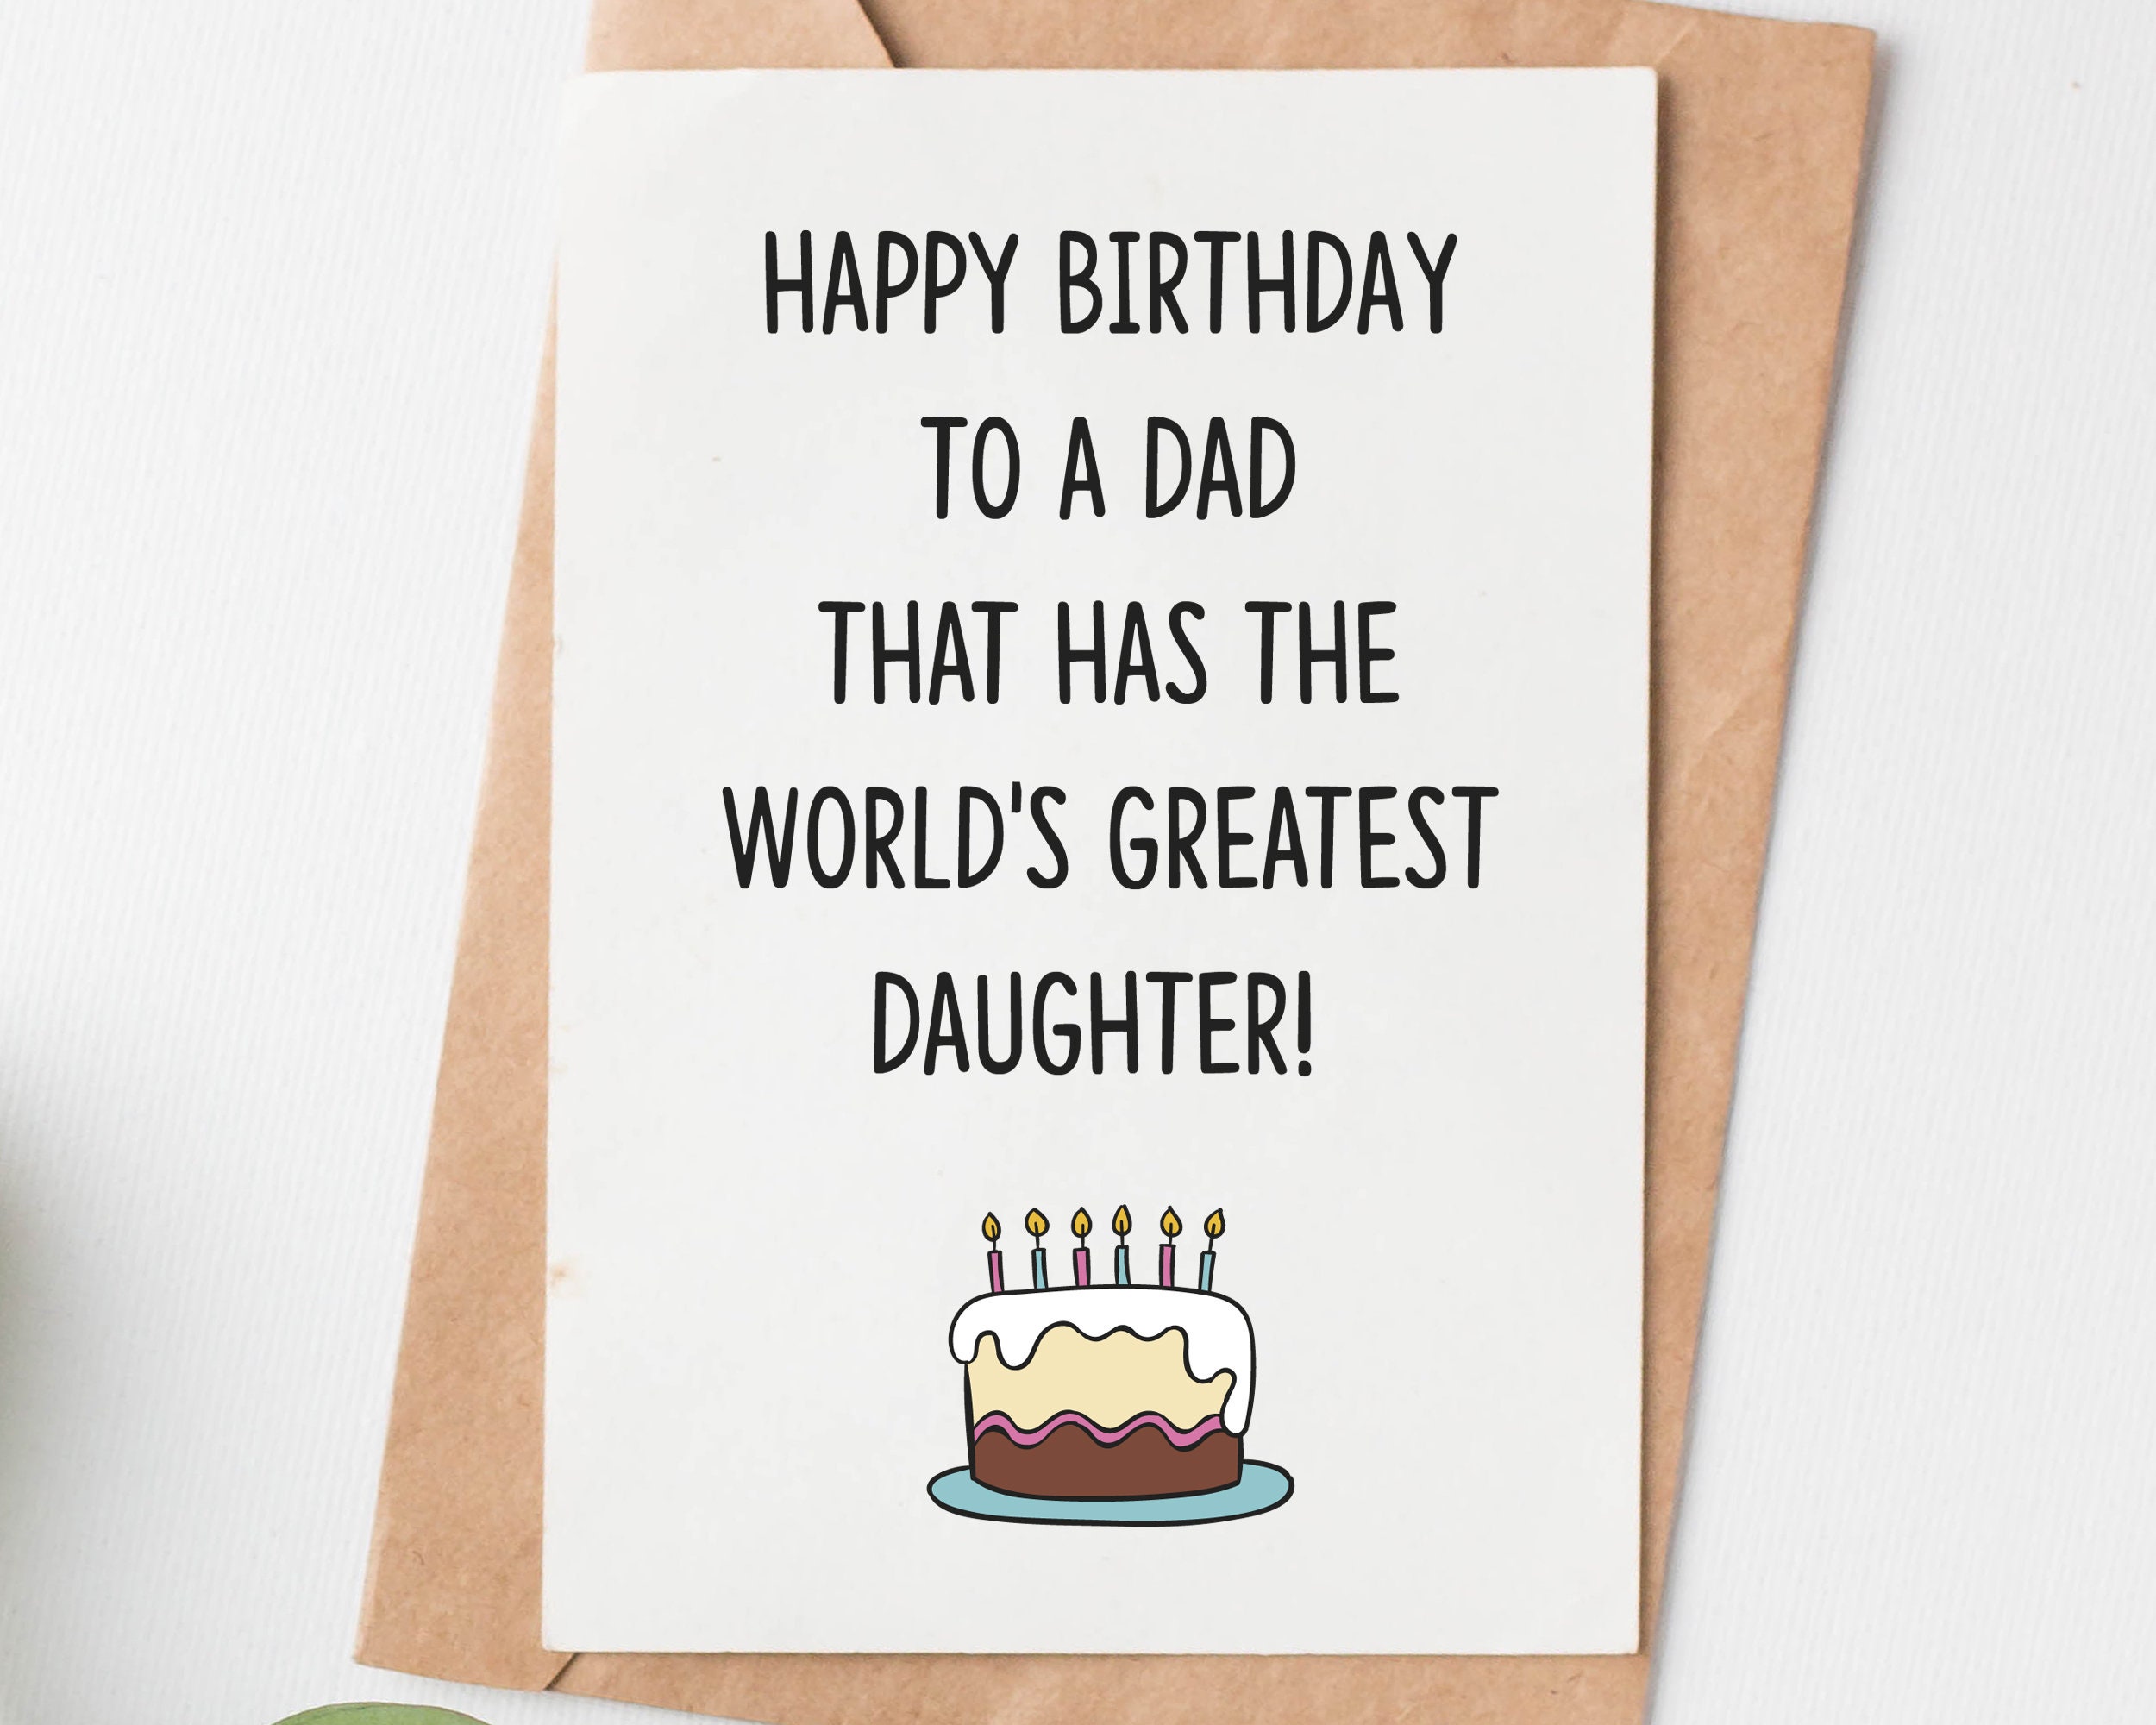 how-to-make-a-birthday-card-for-dad-birthday-cards-for-dad-from-funny-birthday-cards-for-dad